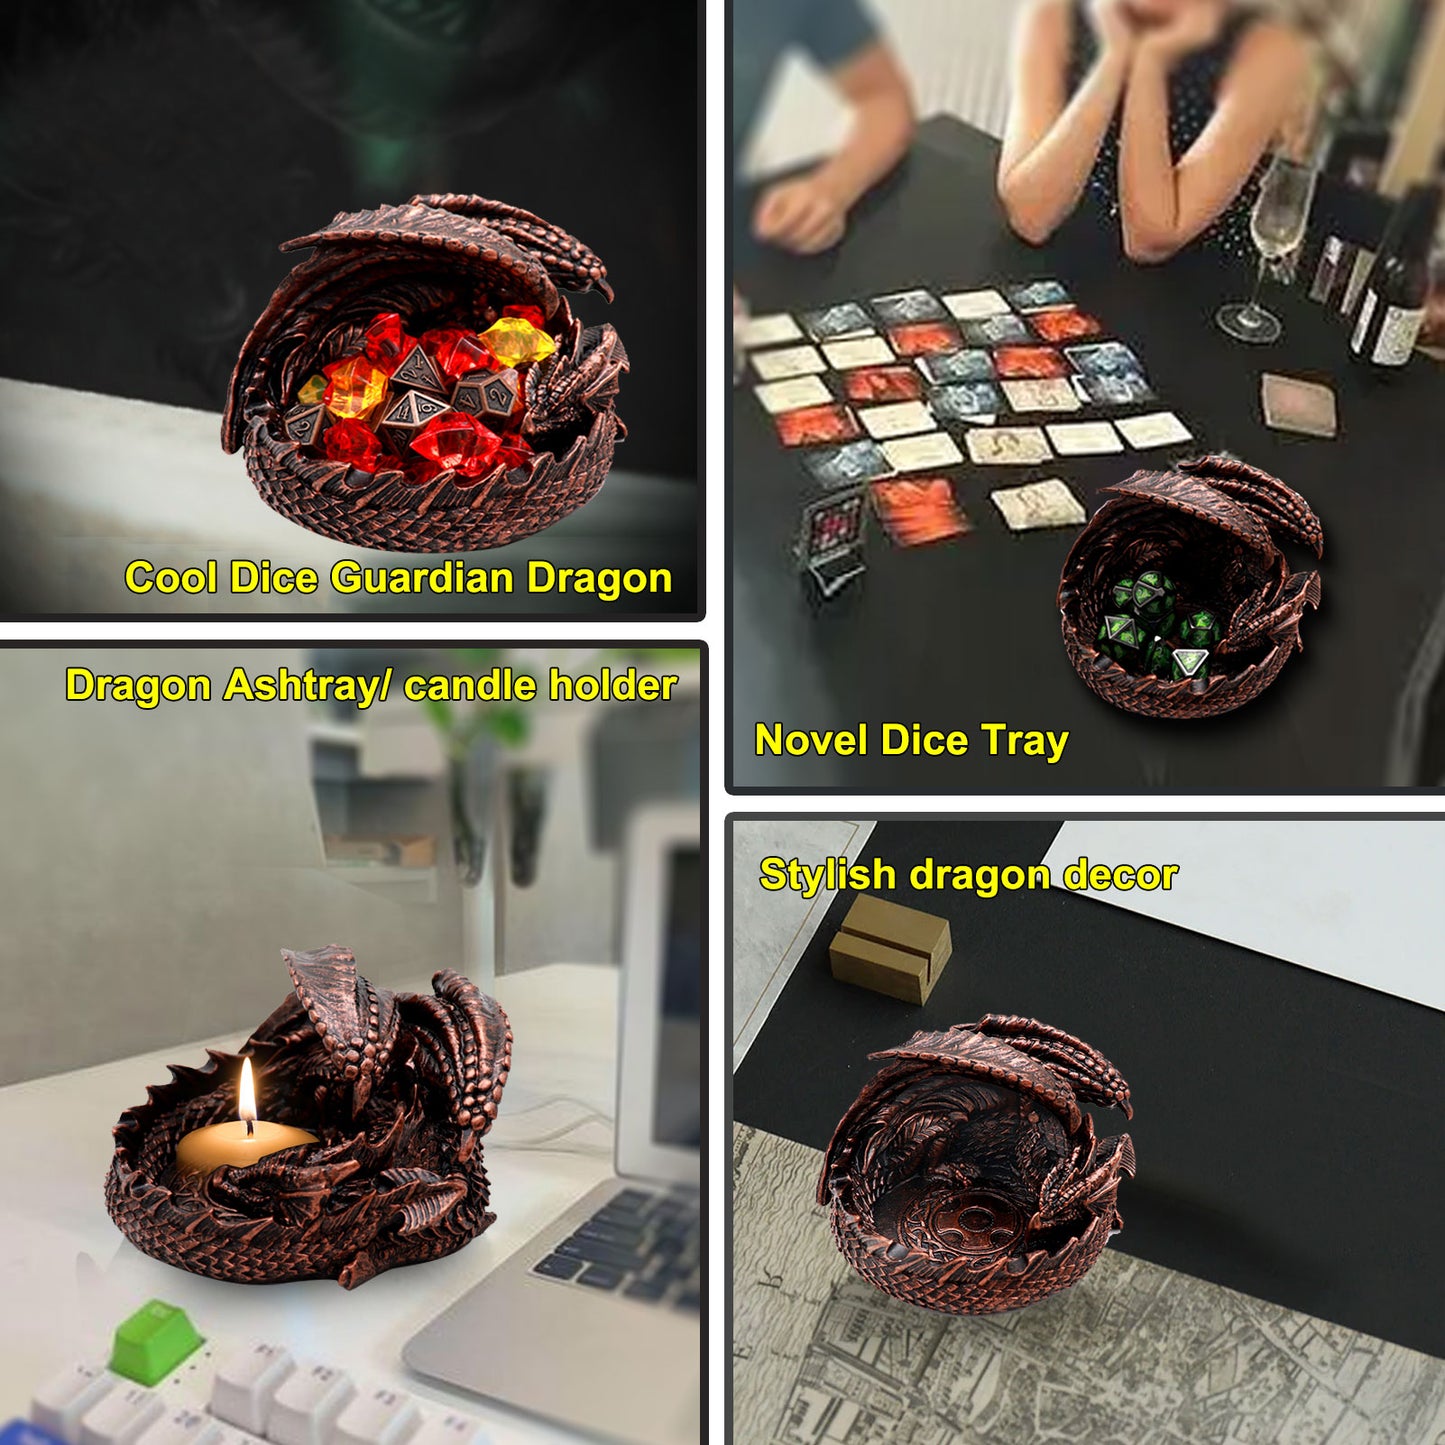 Haxtec Dragon Dice Jail Guardian DND Dice Tray Holder Dungeons and Dragons Accessories Novelty DM RPG Gift Dragon Statue Decor(Antique Copper)